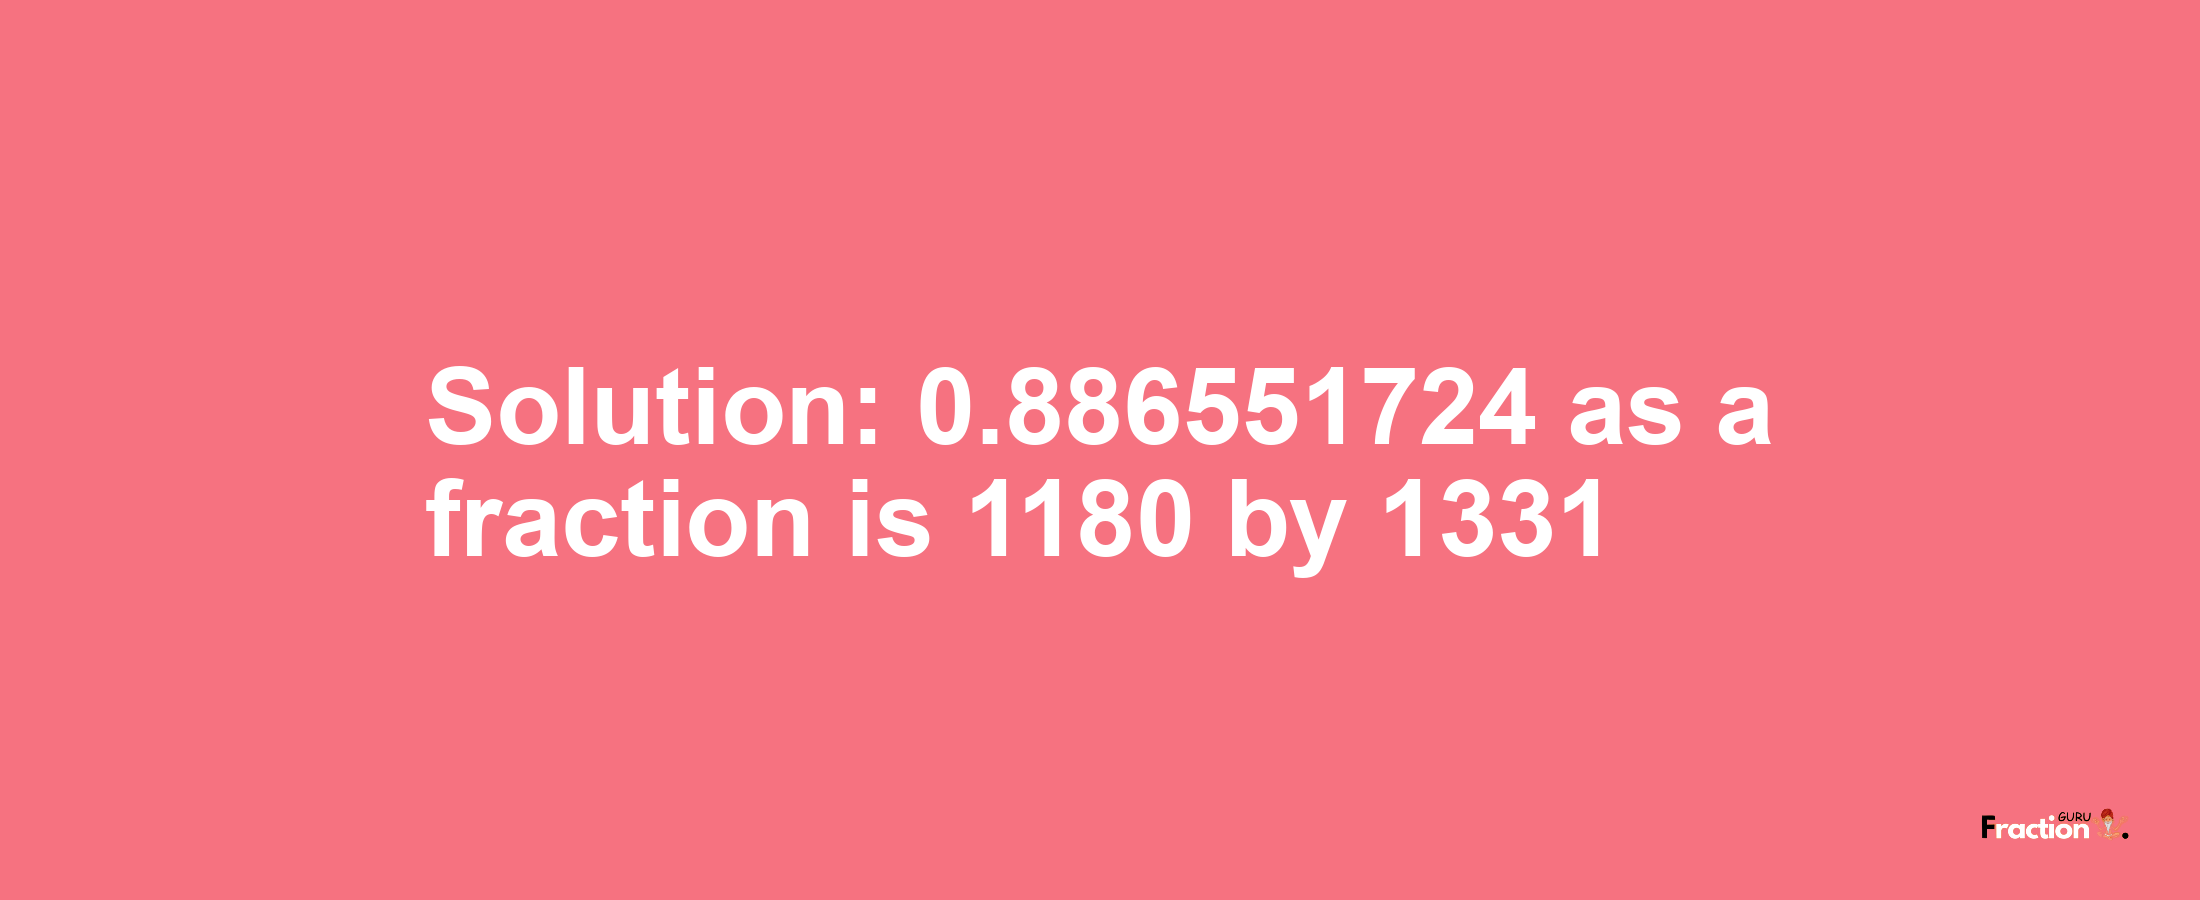 Solution:0.886551724 as a fraction is 1180/1331